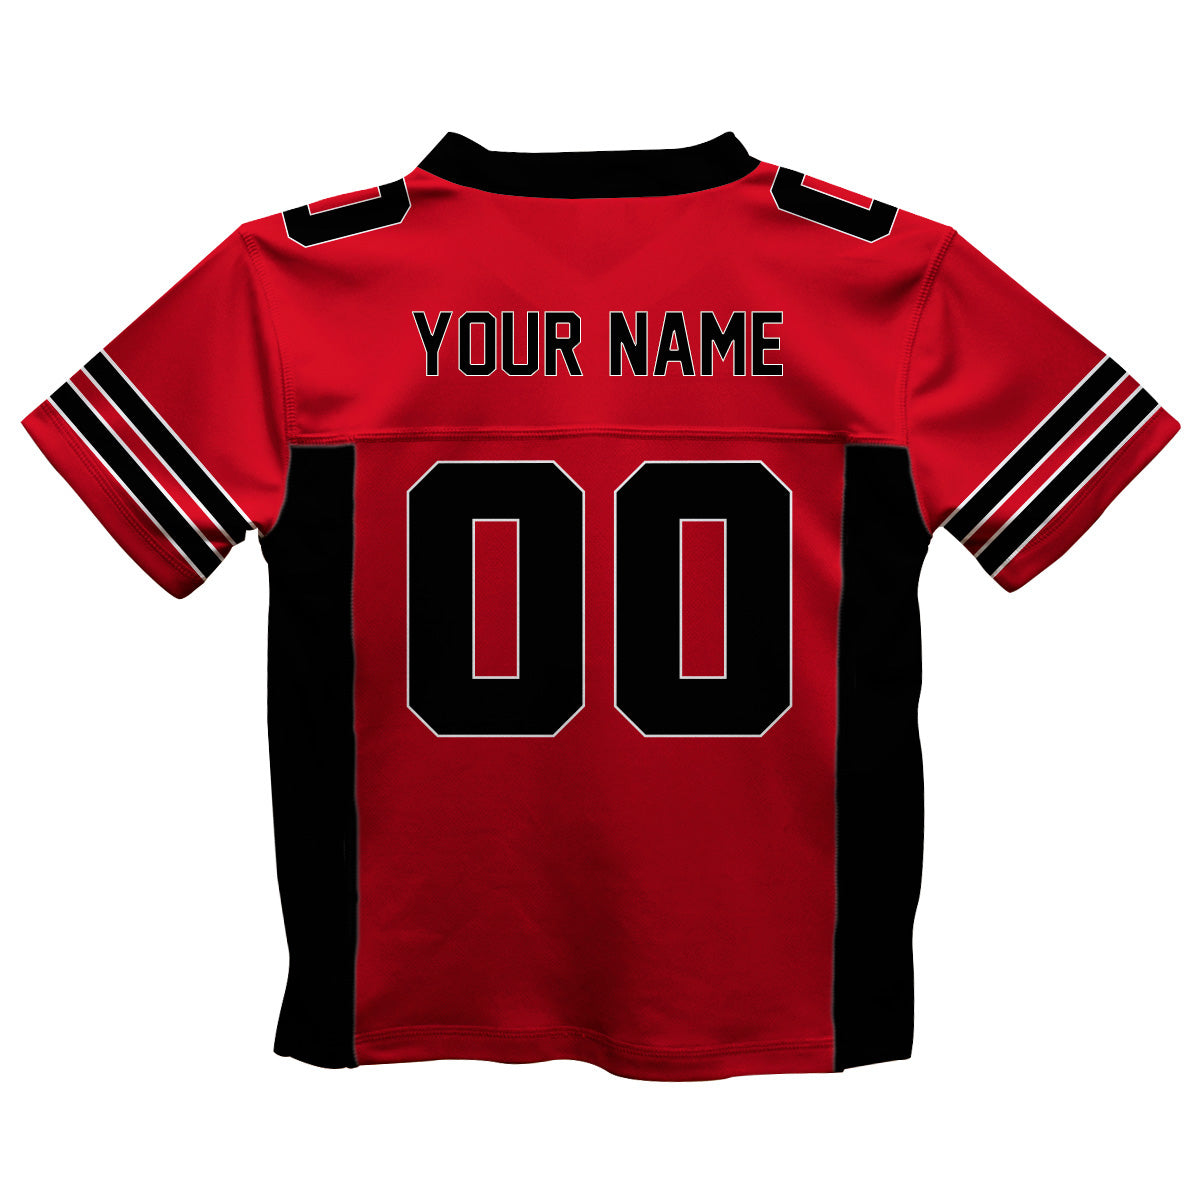 Personalized Name and Number Blue and Black Fashion Football T-Shirt - Wimziy&Co.